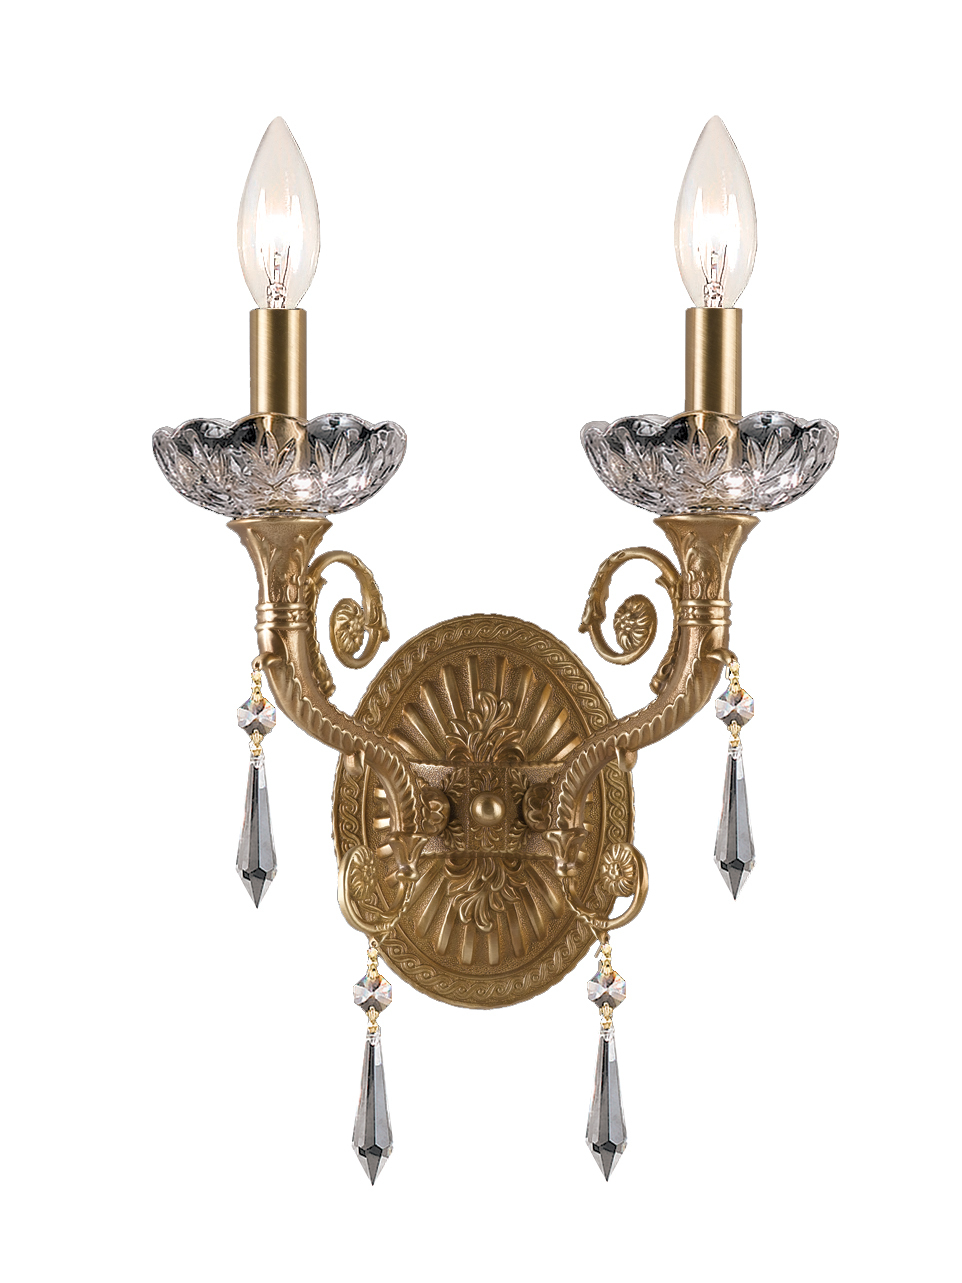 Regal 2 Light Clear Crystal Brass Sconce